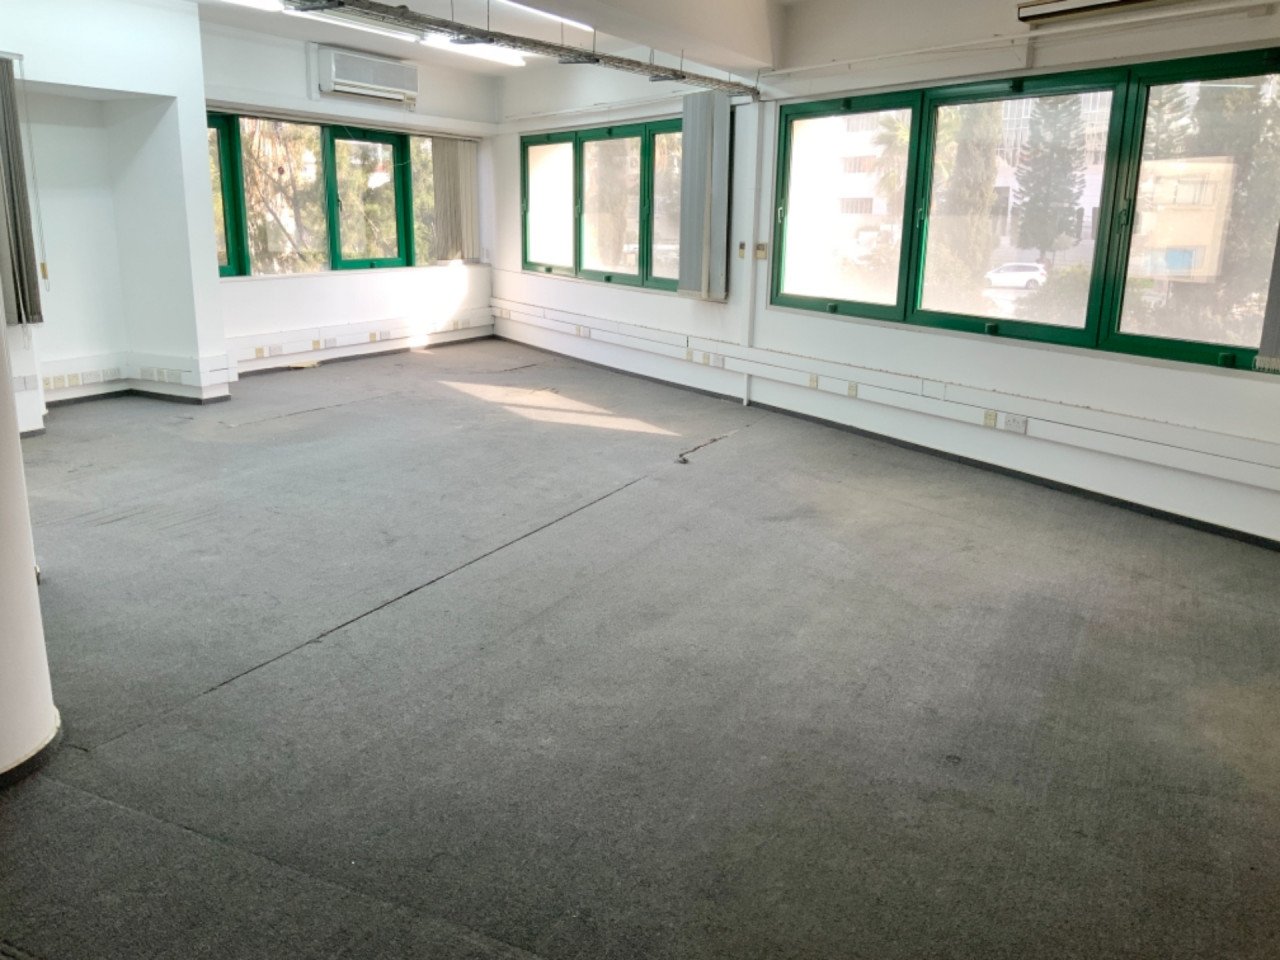 Property for Rent: Commercial (Office) in Agioi Omologites, Nicosia for Rent | Key Realtor Cyprus